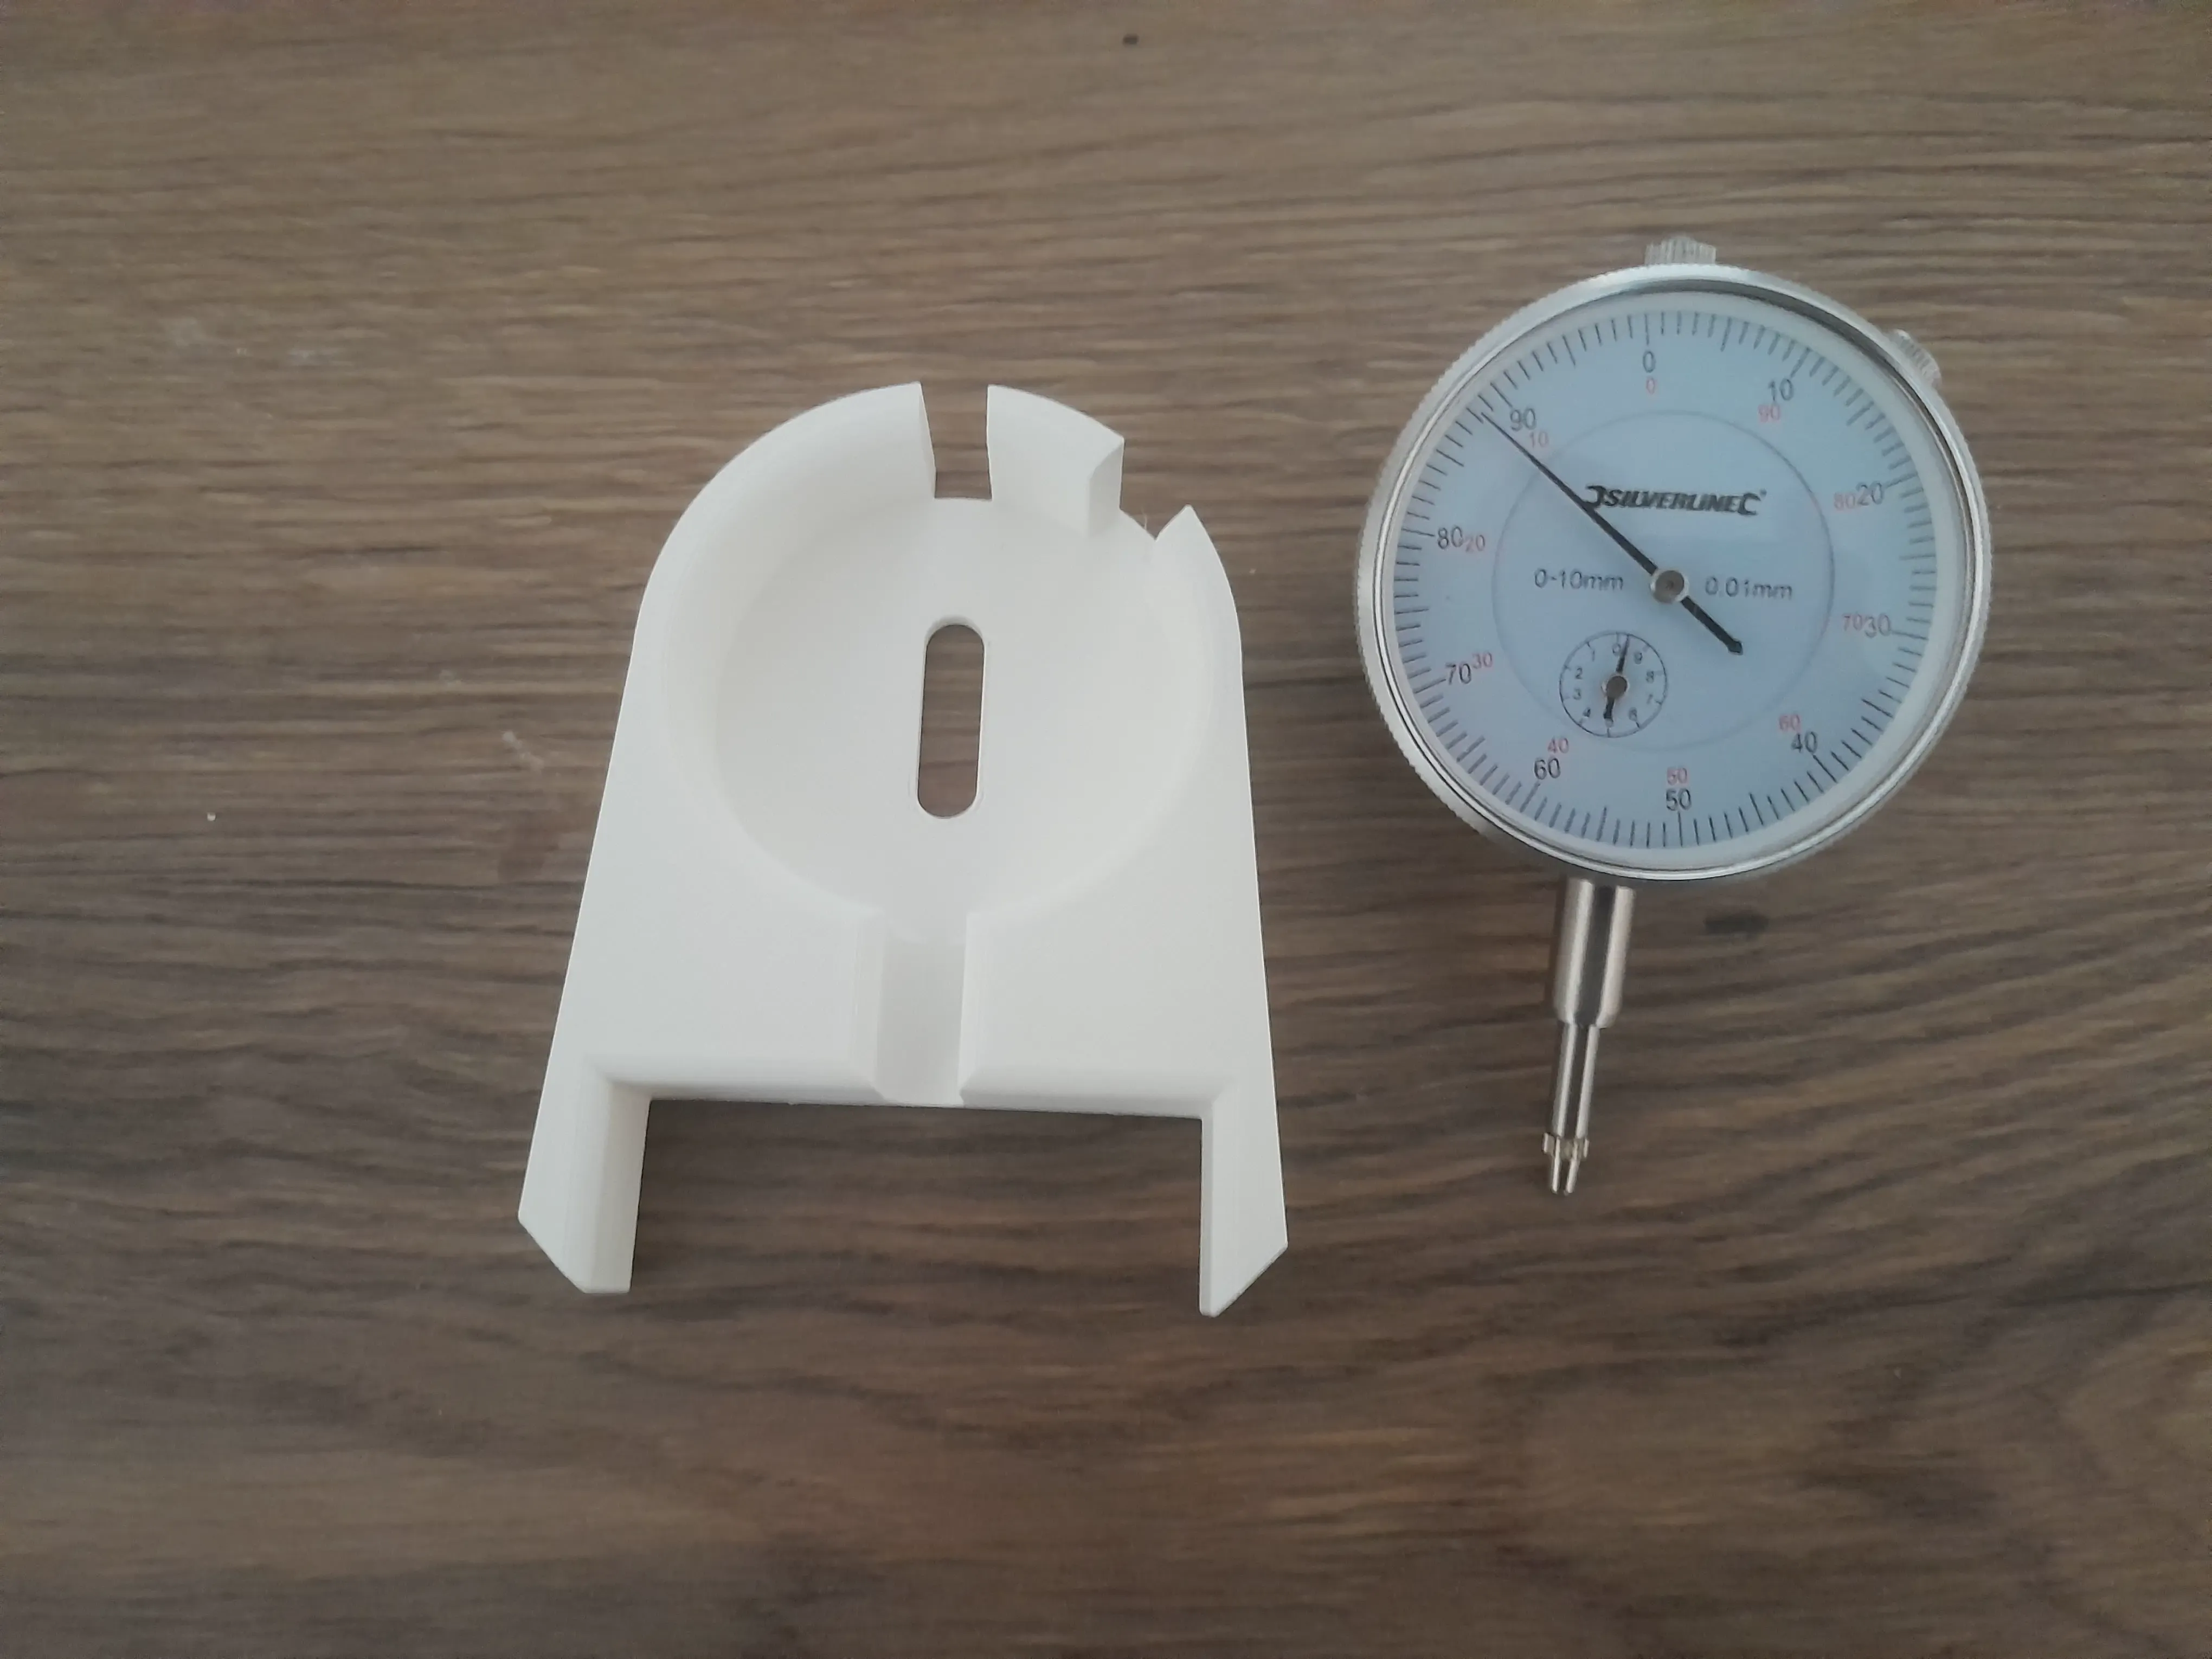 Thichness gauge comparator 60mm